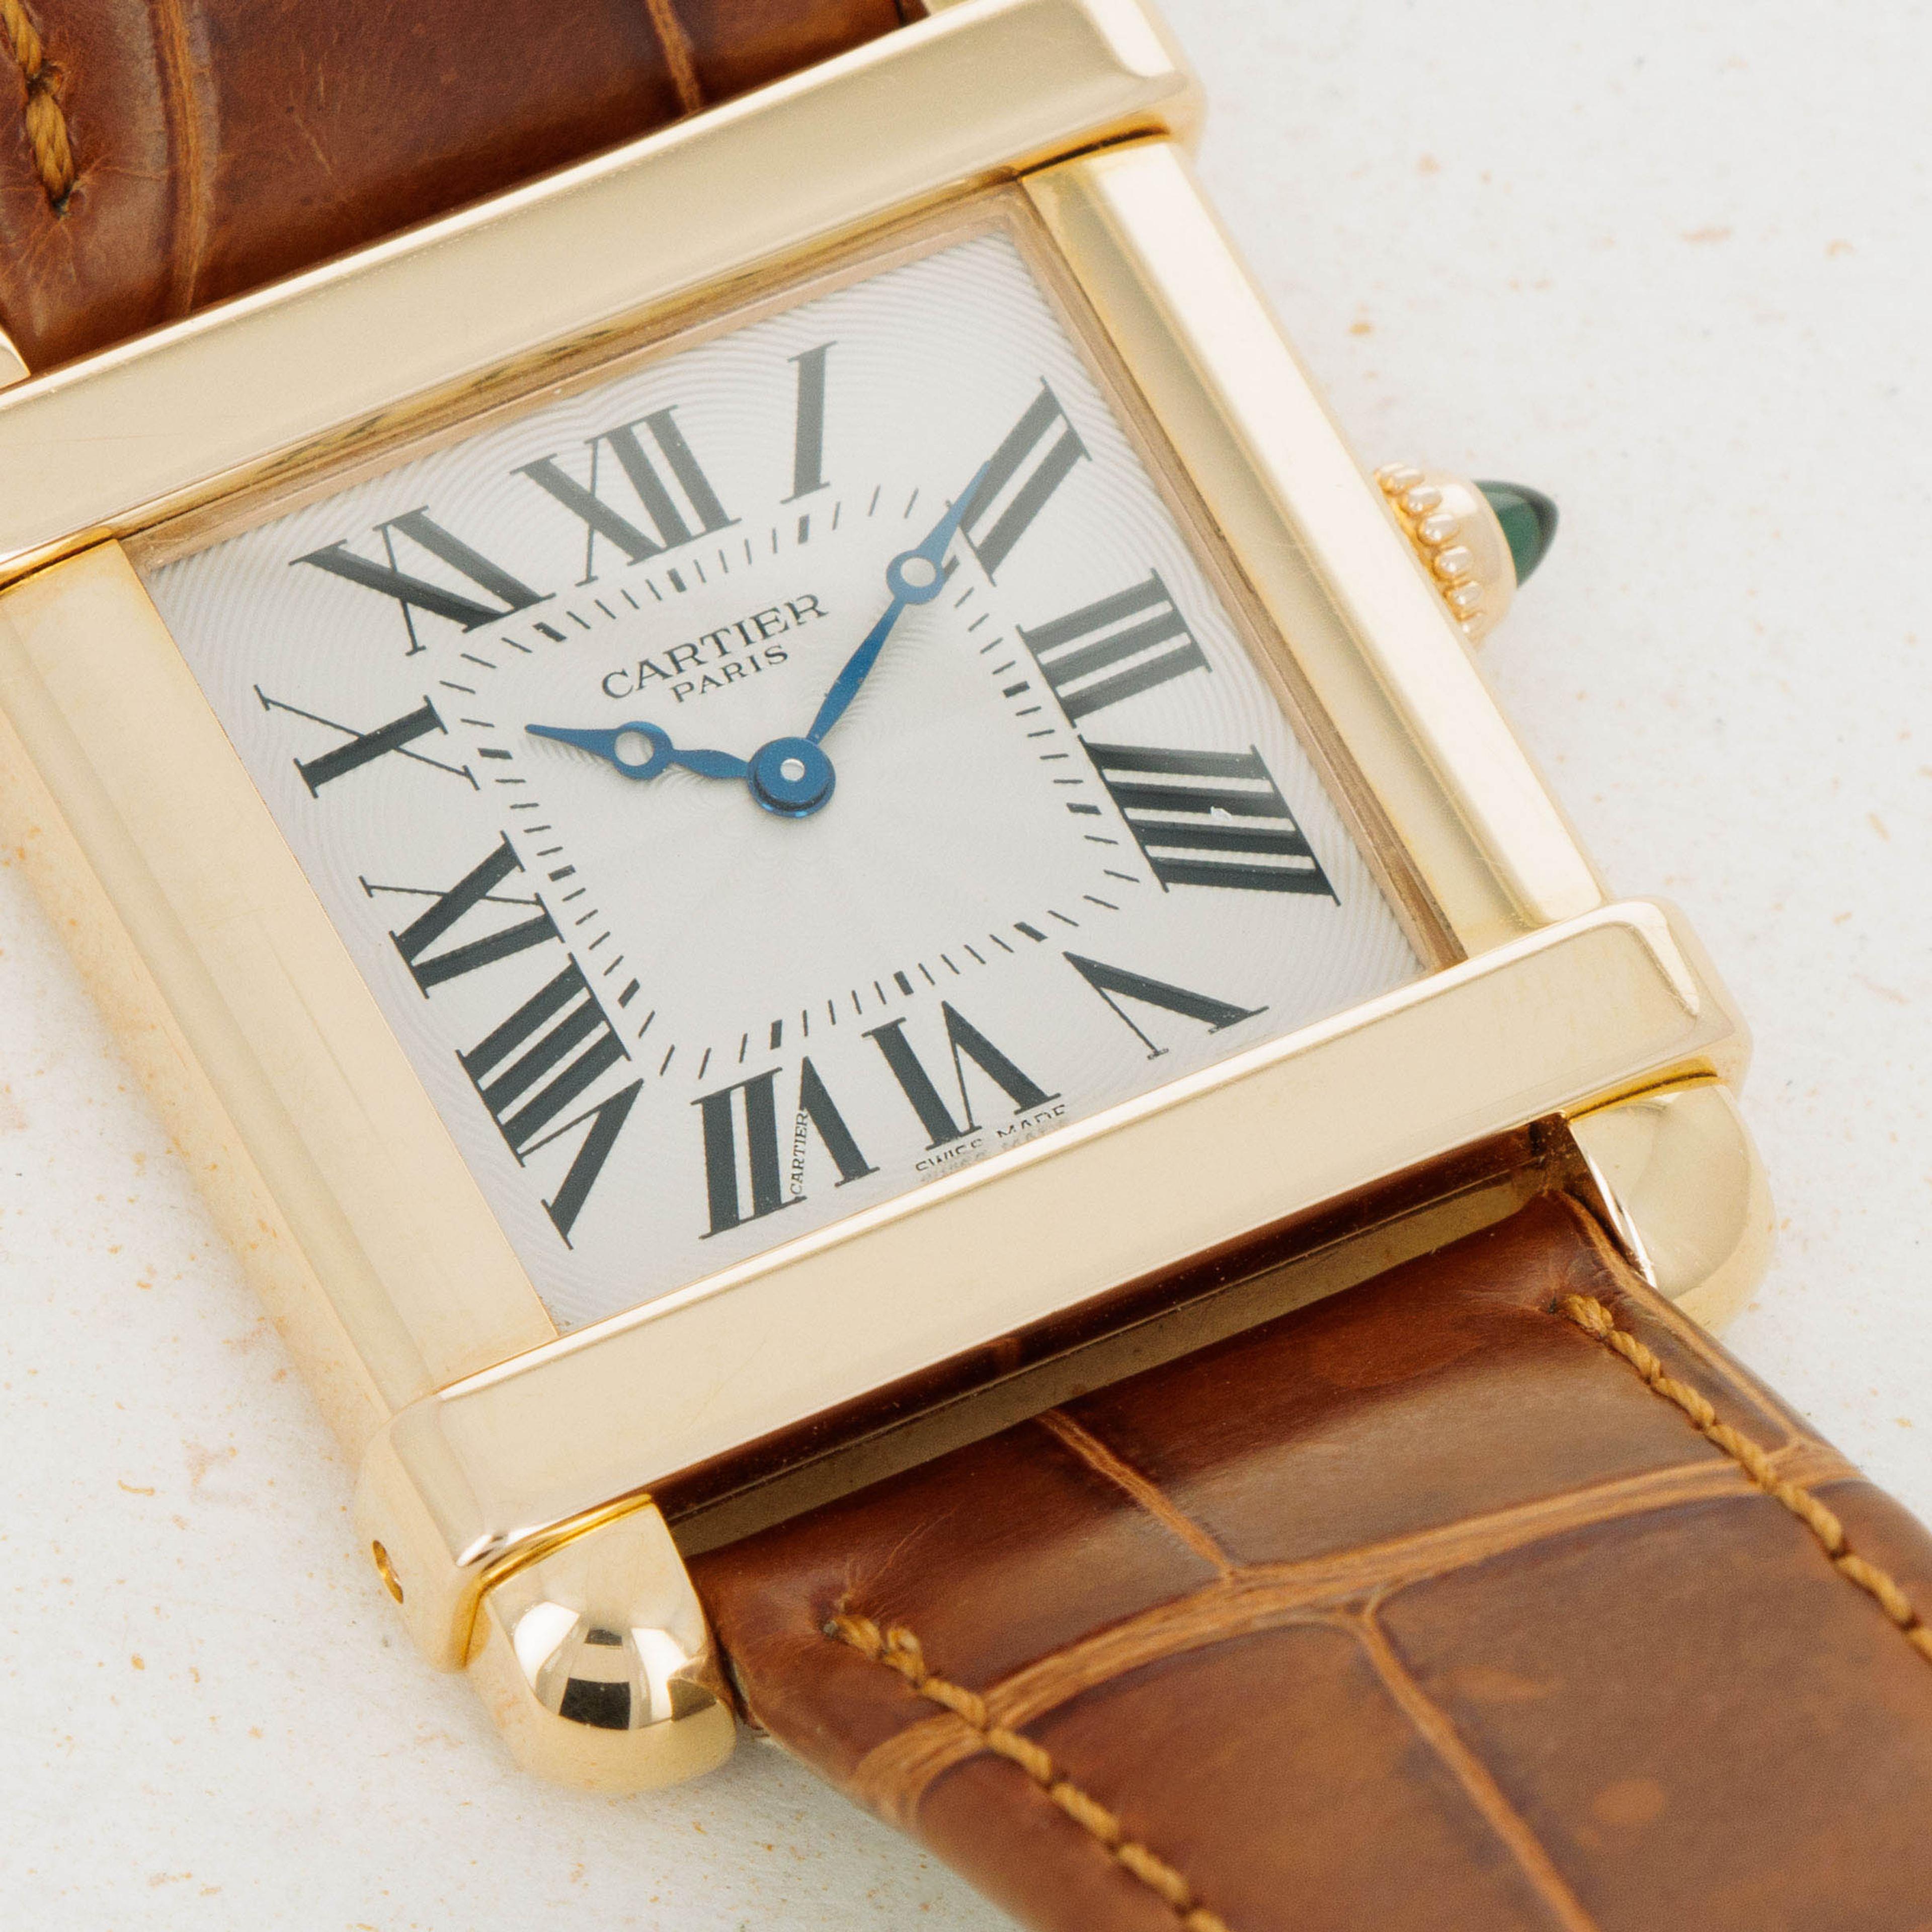 Introducing: The Cartier Tank Louis Cartier In Rose Gold With